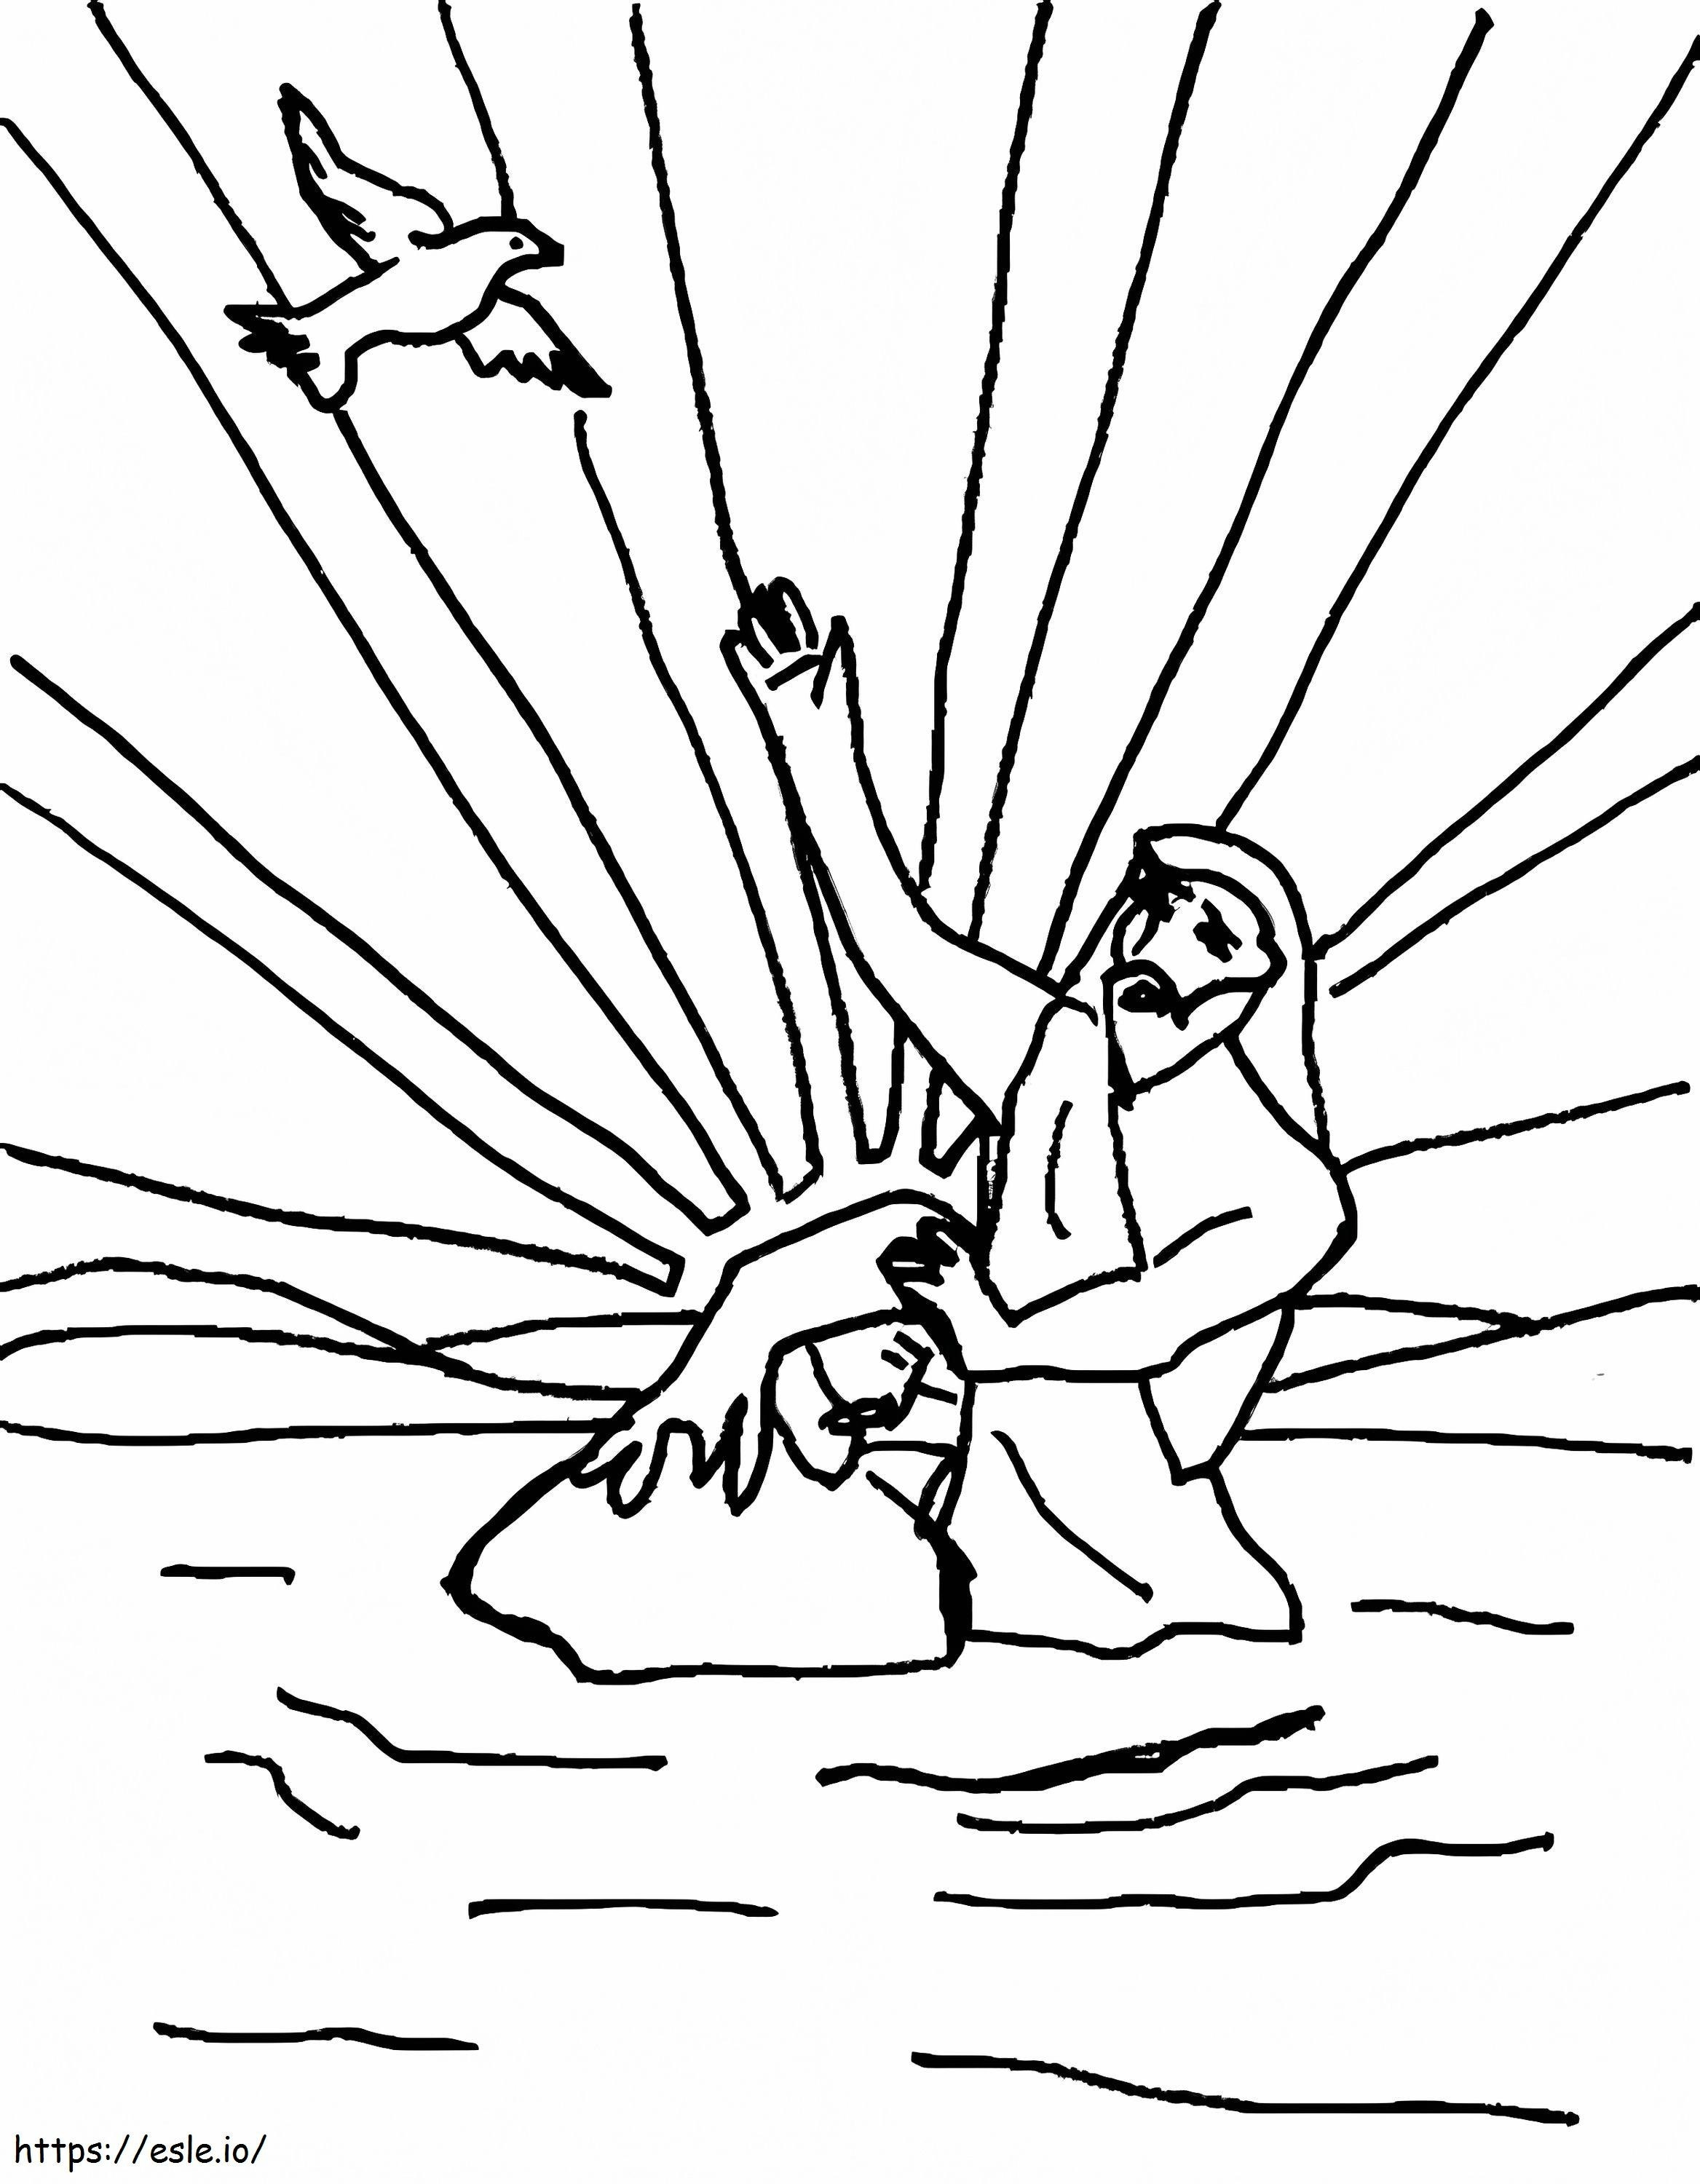 Printable Baptism Of Chirst coloring page